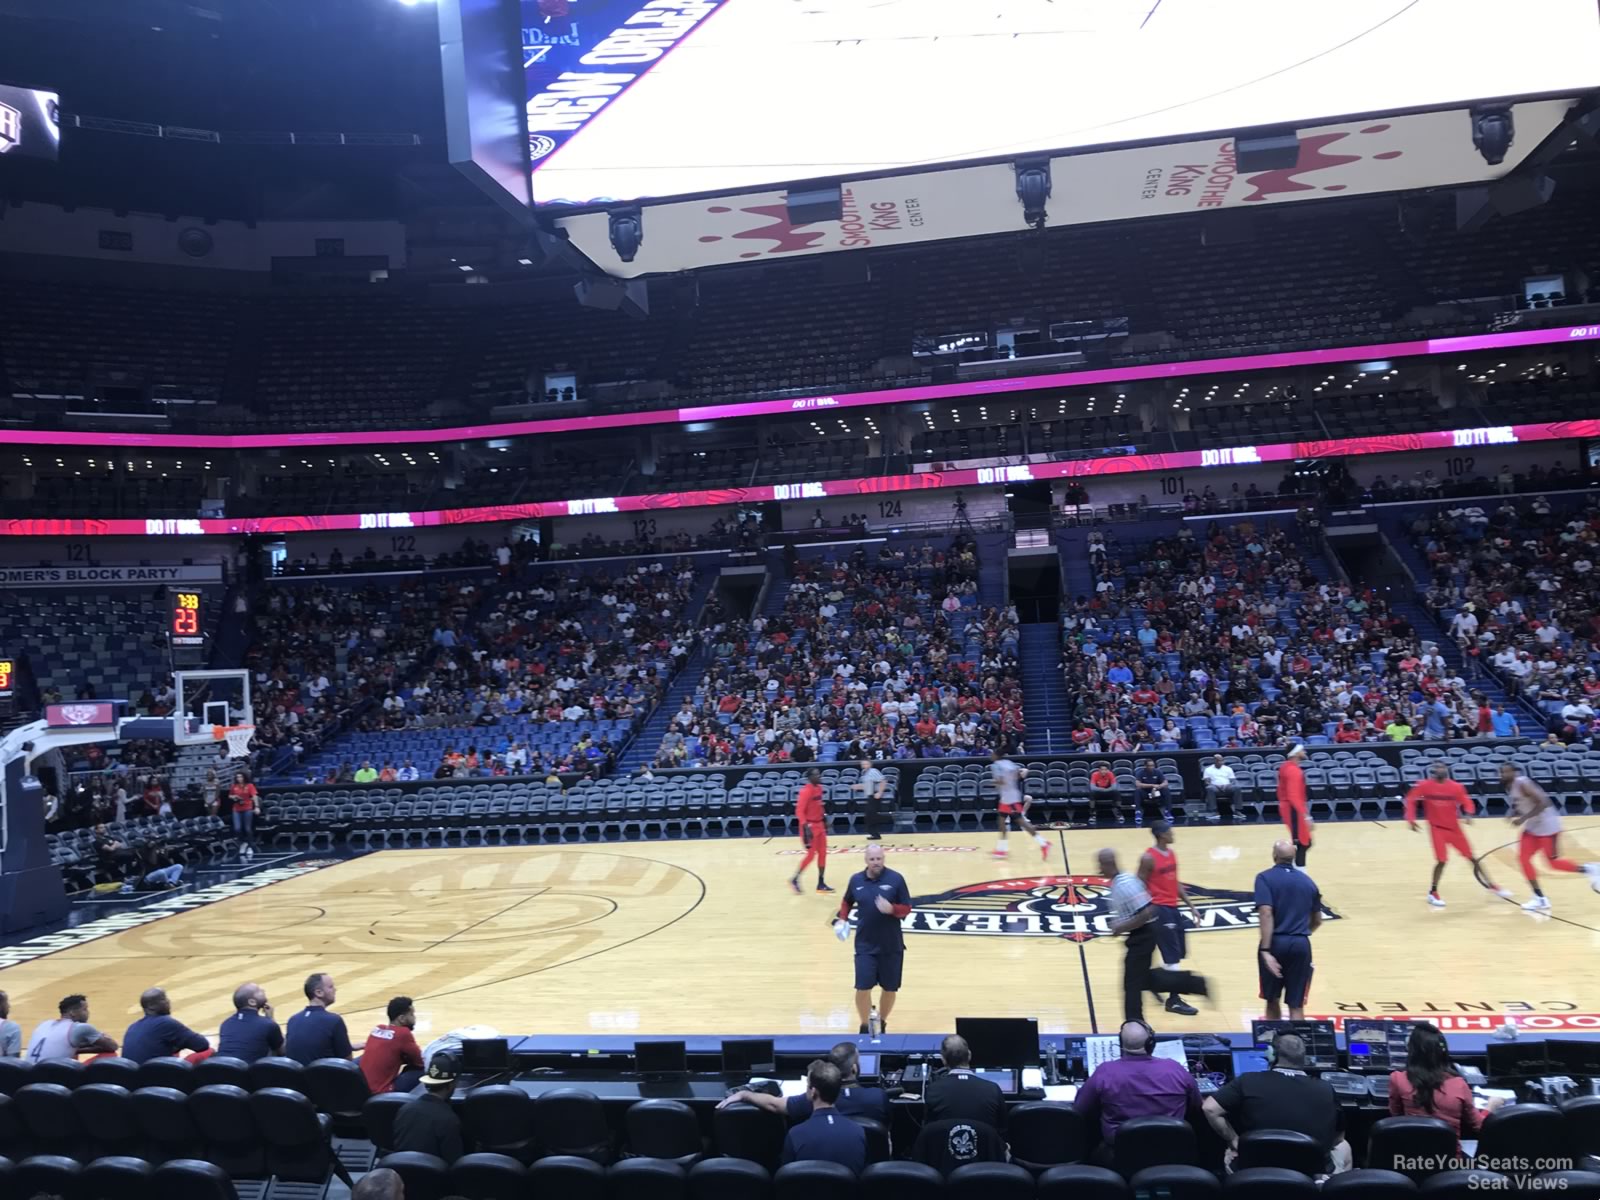 section 113, row 9 seat view  for basketball - smoothie king center